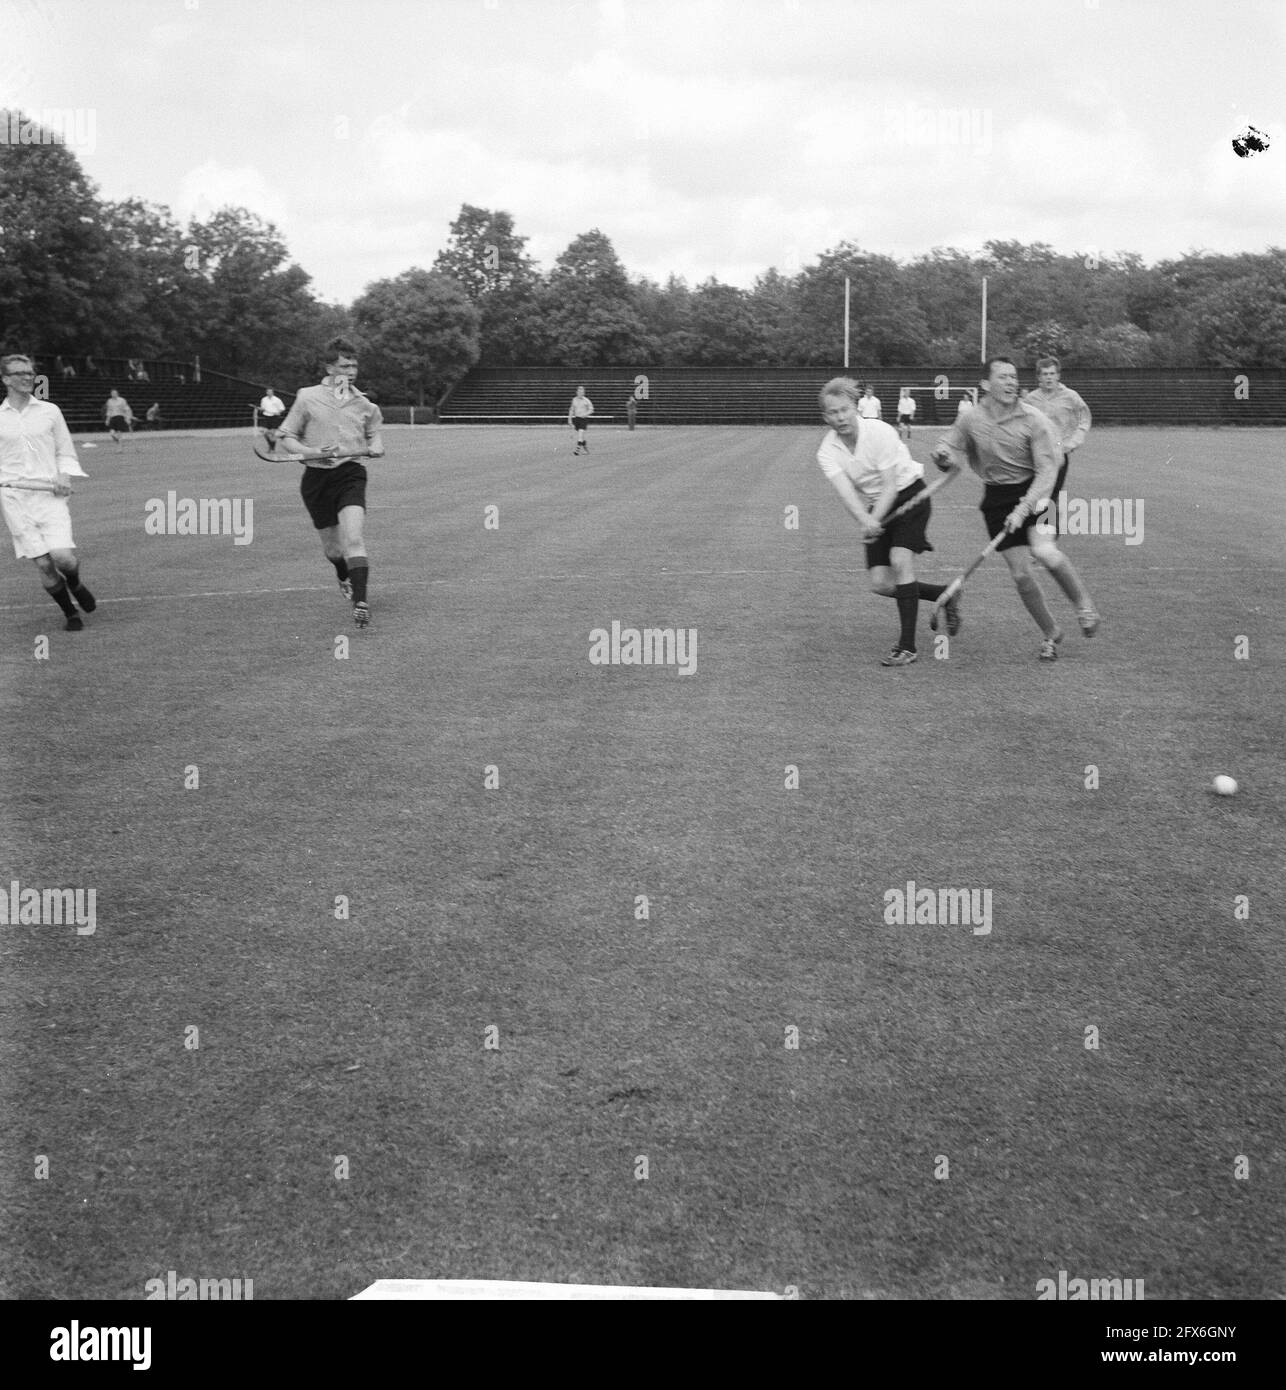 Hockey ASC against Rest of the Netherlands as part of the Lustrumfeest (game moment), June 28, 1962, field hockey, lustrum festivities, The Netherlands, 20th century press agency photo, news to remember, documentary, historic photography 1945-1990, visual stories, human history of the Twentieth Century, capturing moments in time Stock Photo